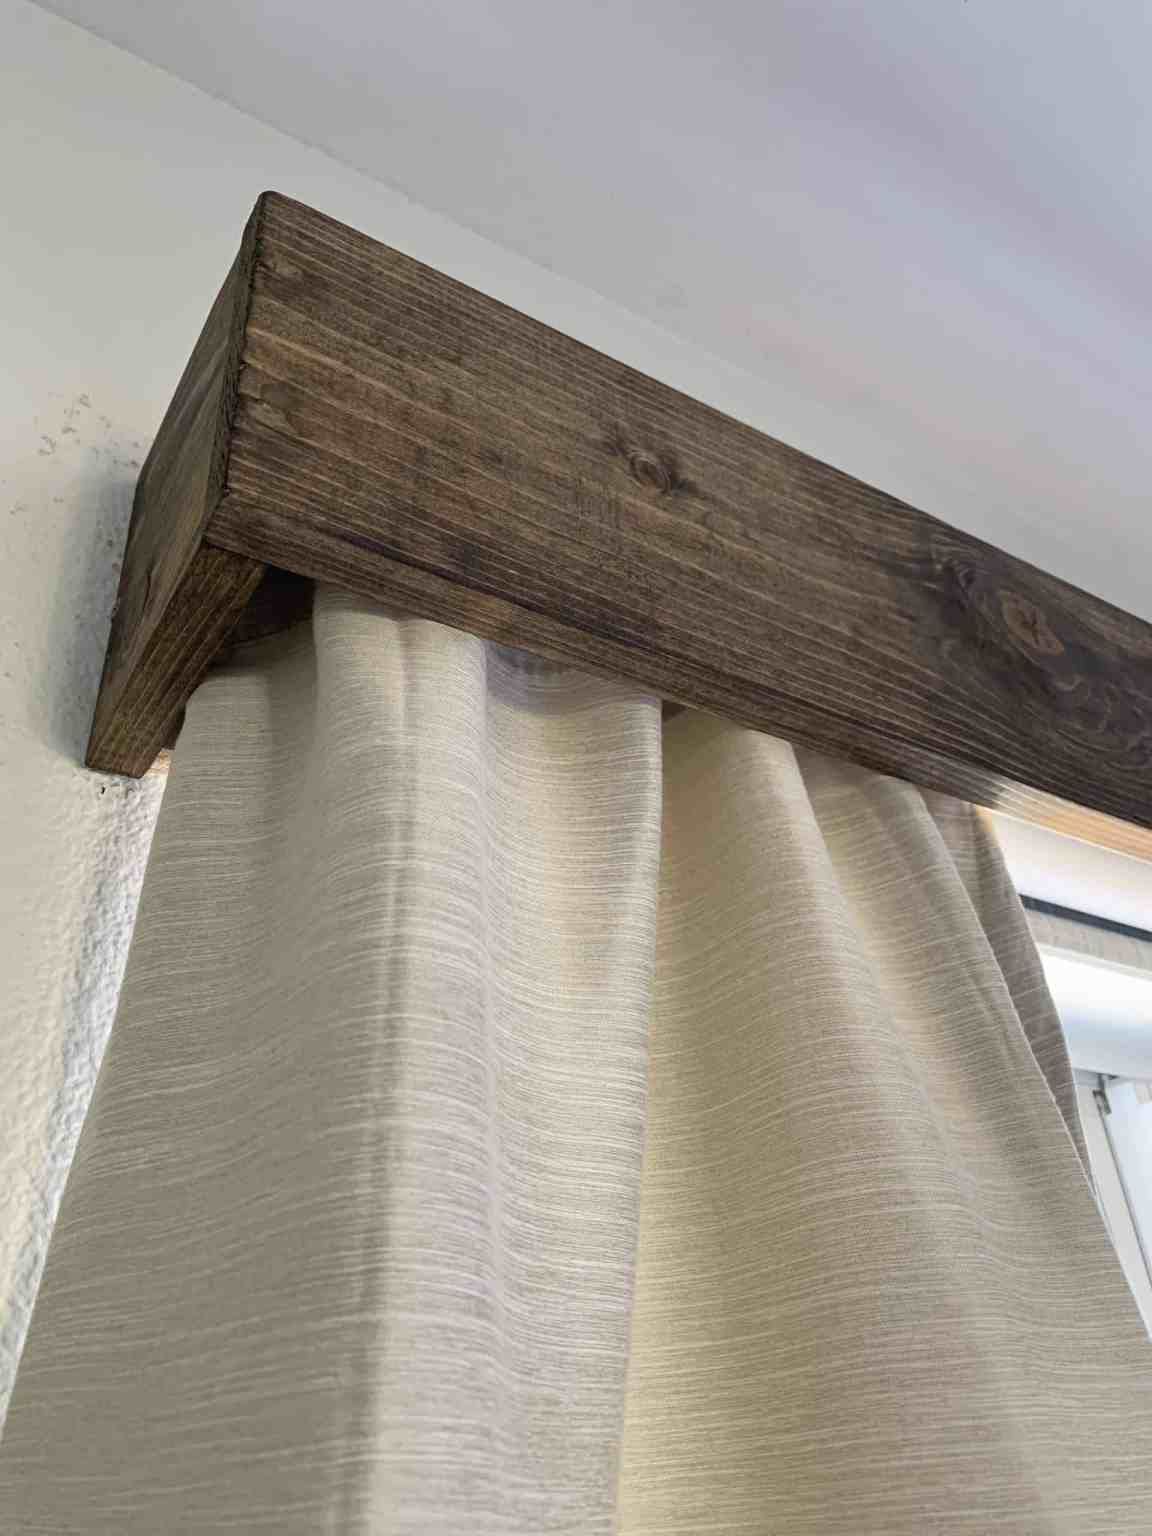 Valance Curtains Bring Personality to Your Home Windows